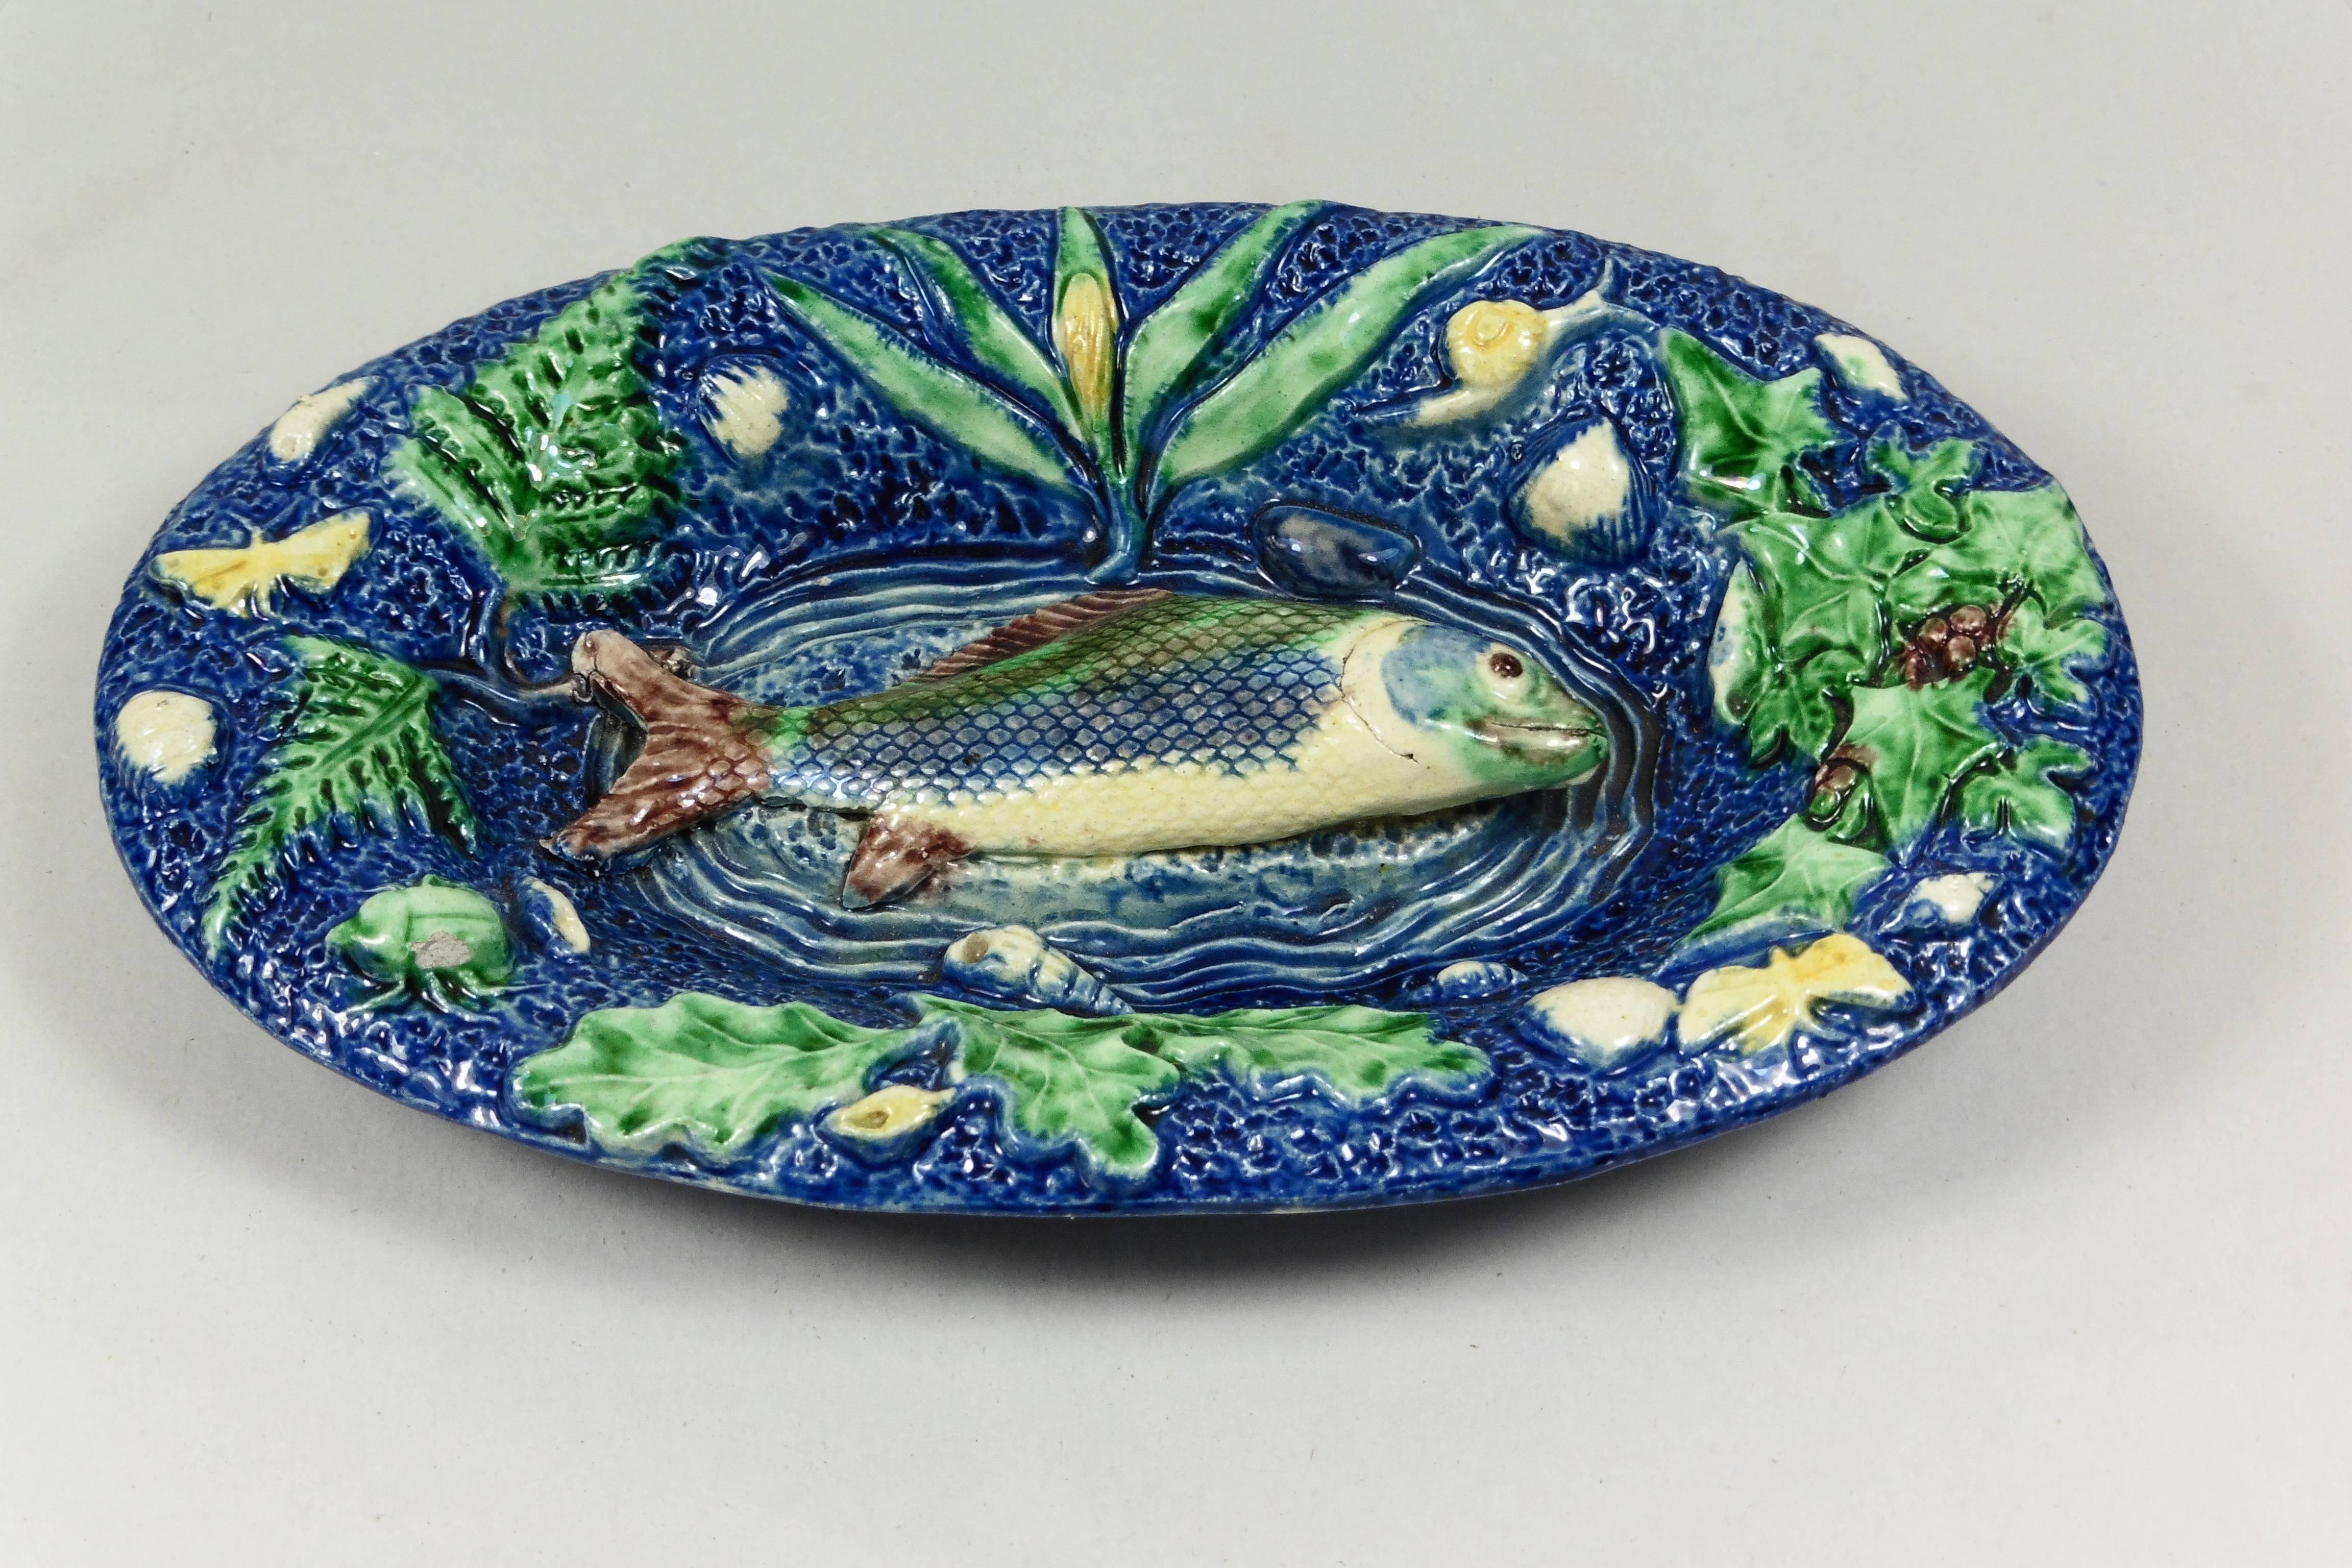 19th Century small oval Palissy platter attributed to Thomas Sergent.
Thomas Victor Sergent was an active member of the School of Paris with others ceramists he made platters and other several others pieces like vases, tobacco jars, jardinières. He